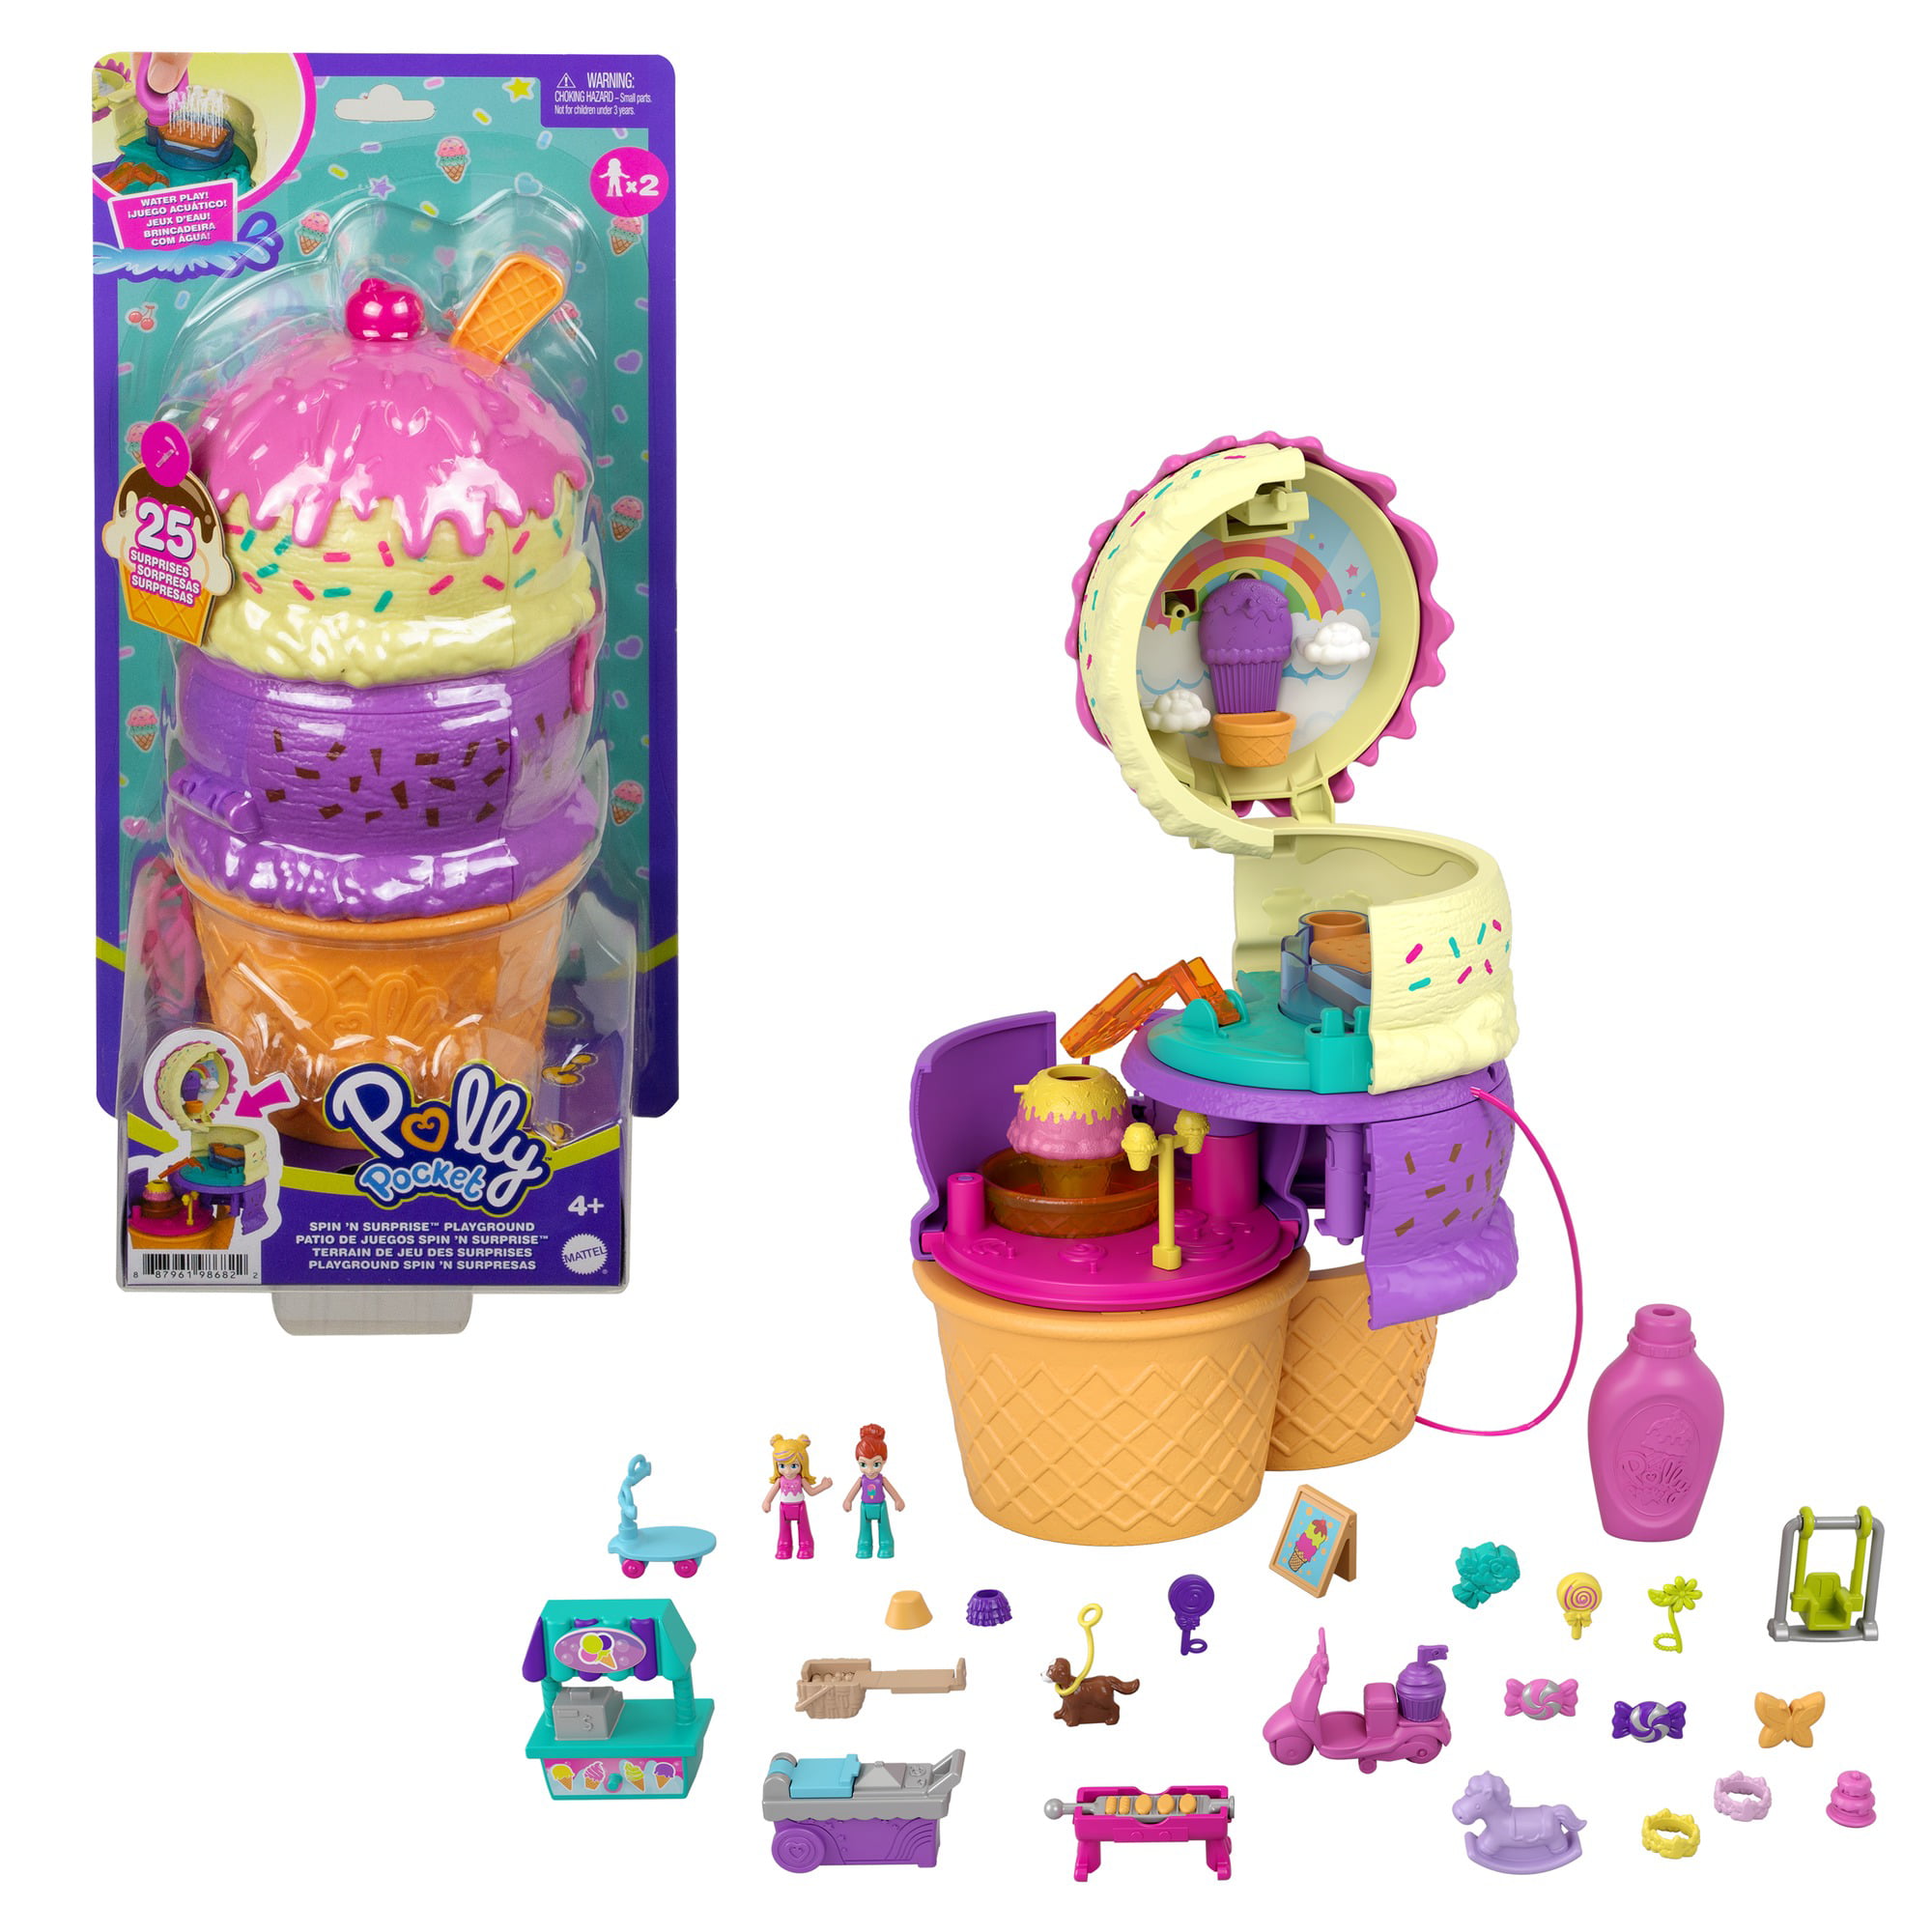 Polly Pocket Spin 'n Surprise Smoothie Compact Playset with Accessories